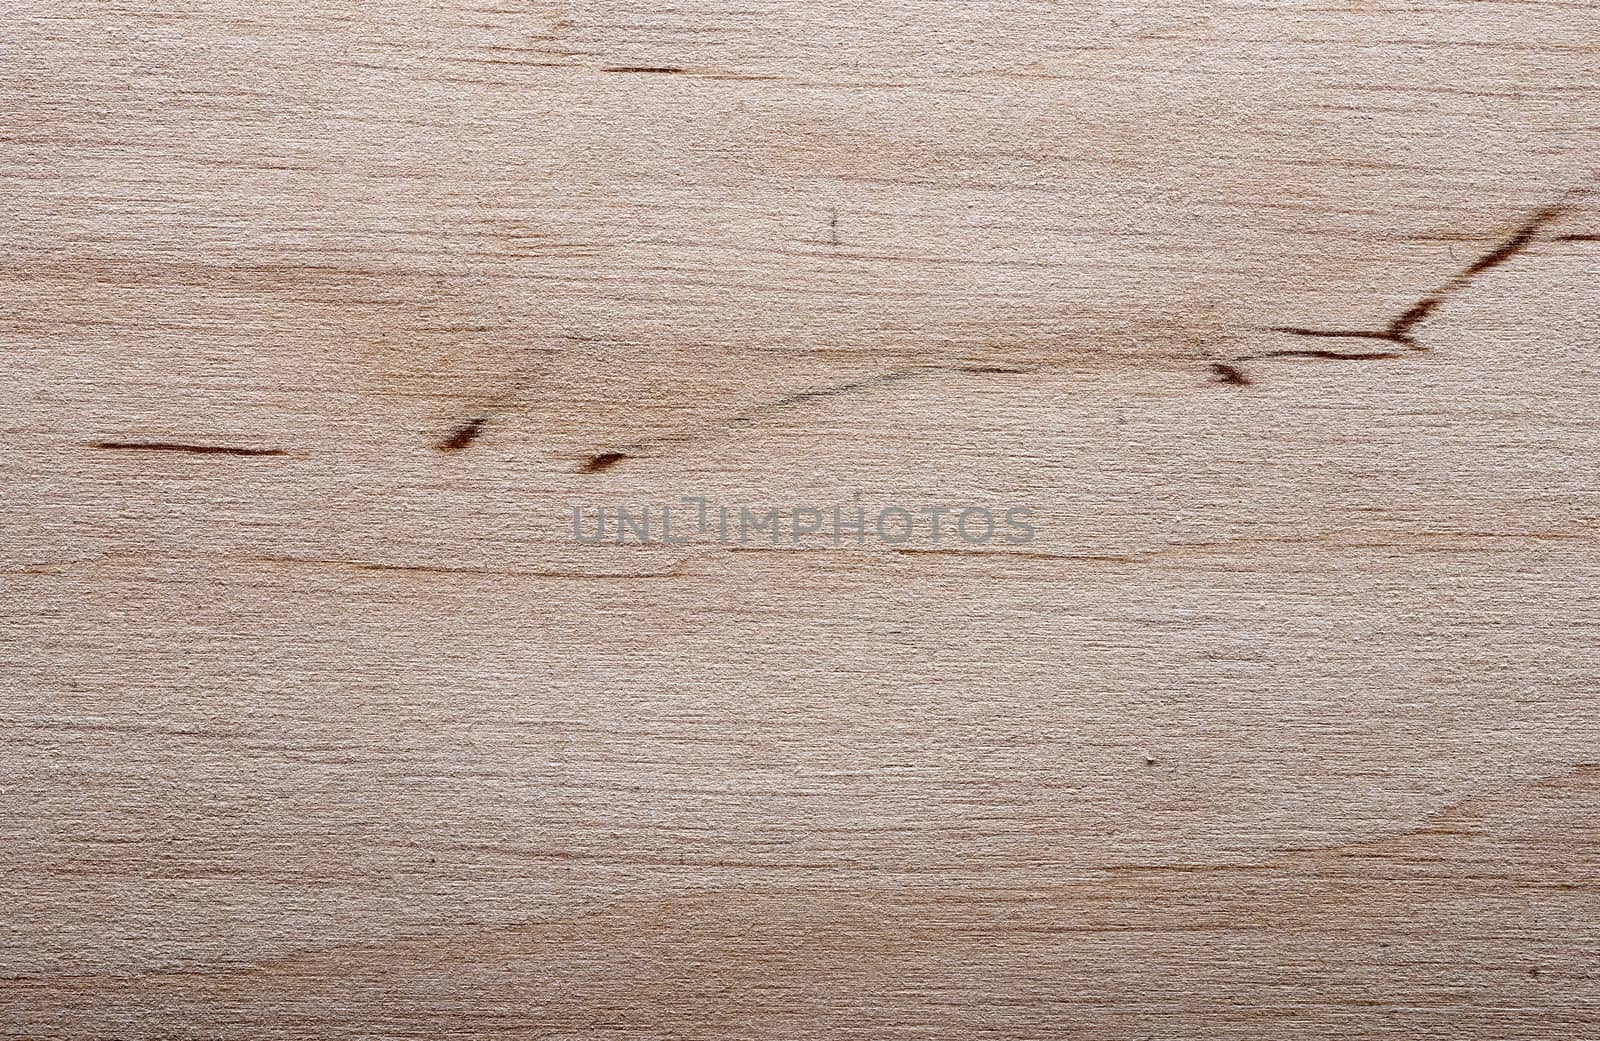 texture of wooden planks closeup